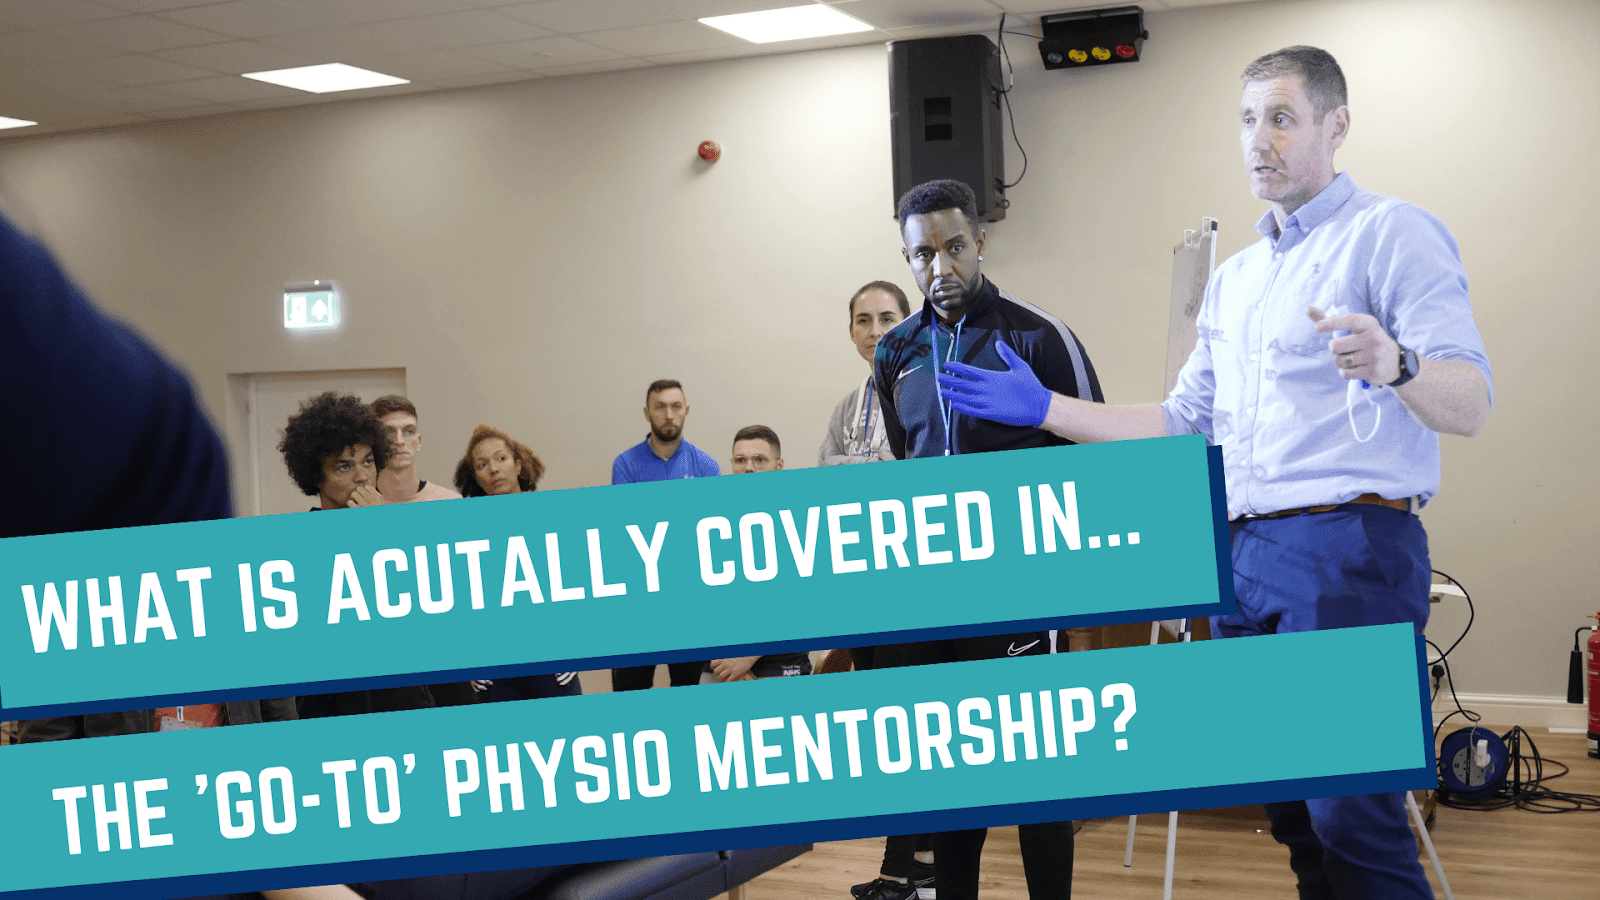 What Is Actually Covered In The 'Go-To' Physio Mentorship?